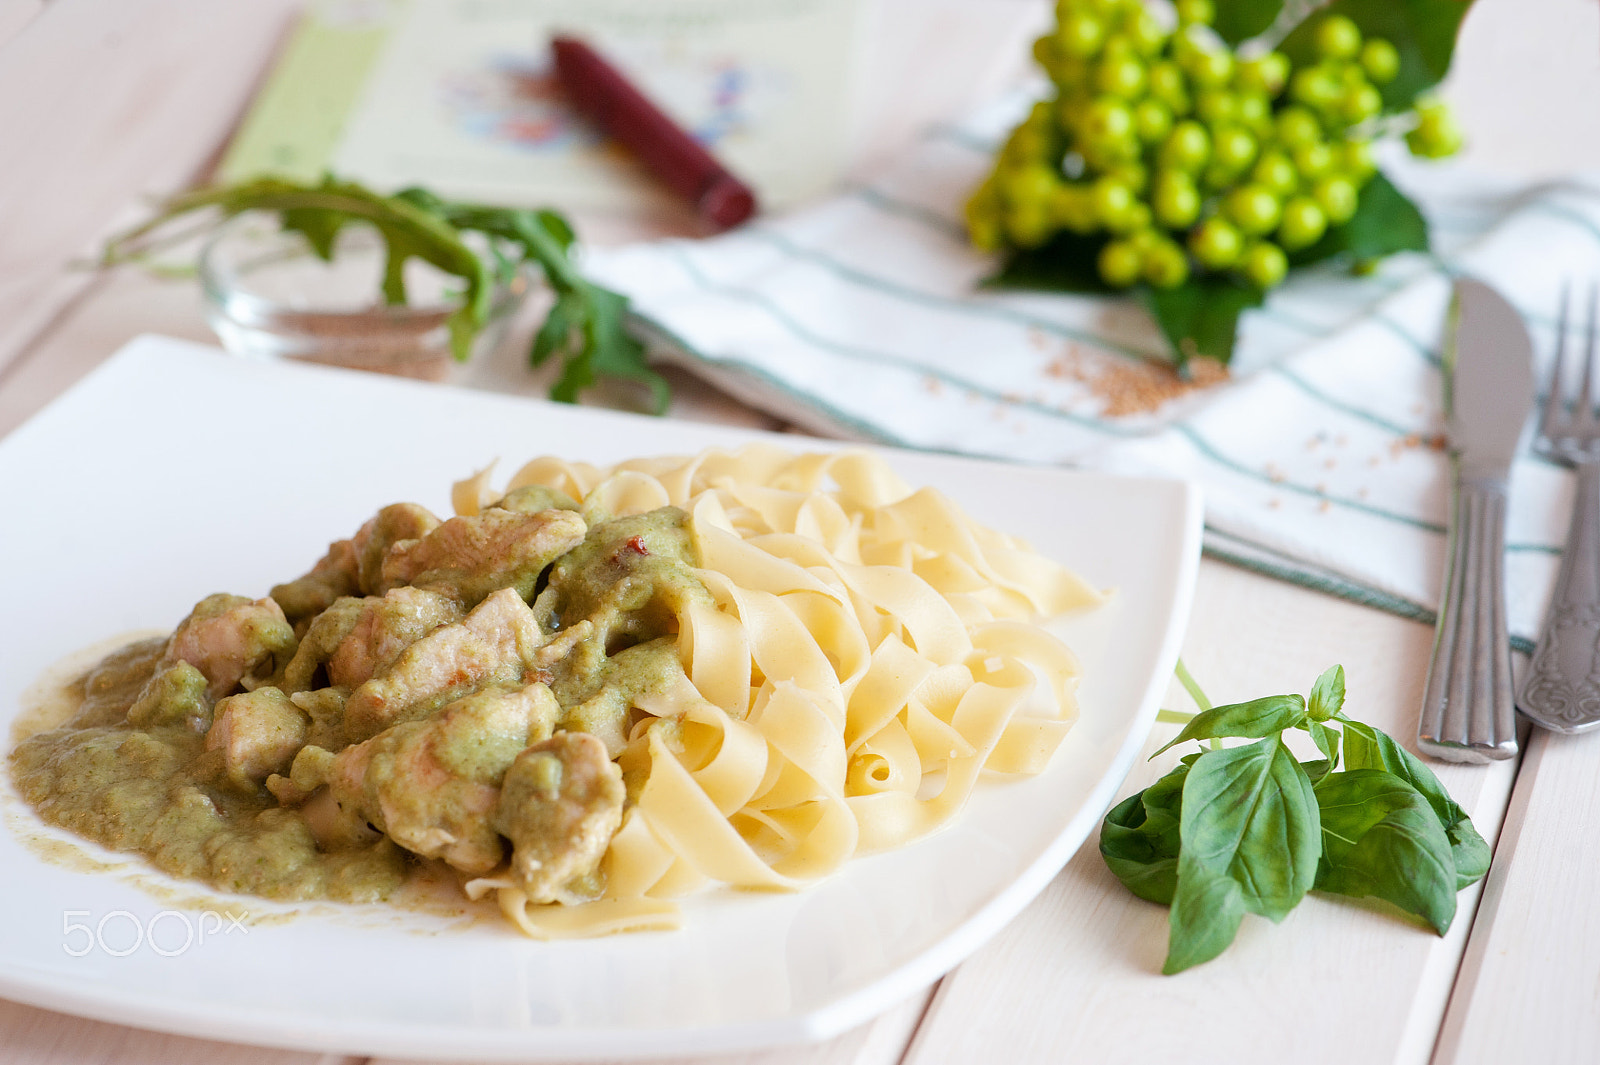 Nikon D700 + Nikon AF-S Micro-Nikkor 105mm F2.8G IF-ED VR sample photo. Fettuccine and chicken with fresh basil and pesto in a white plate photography